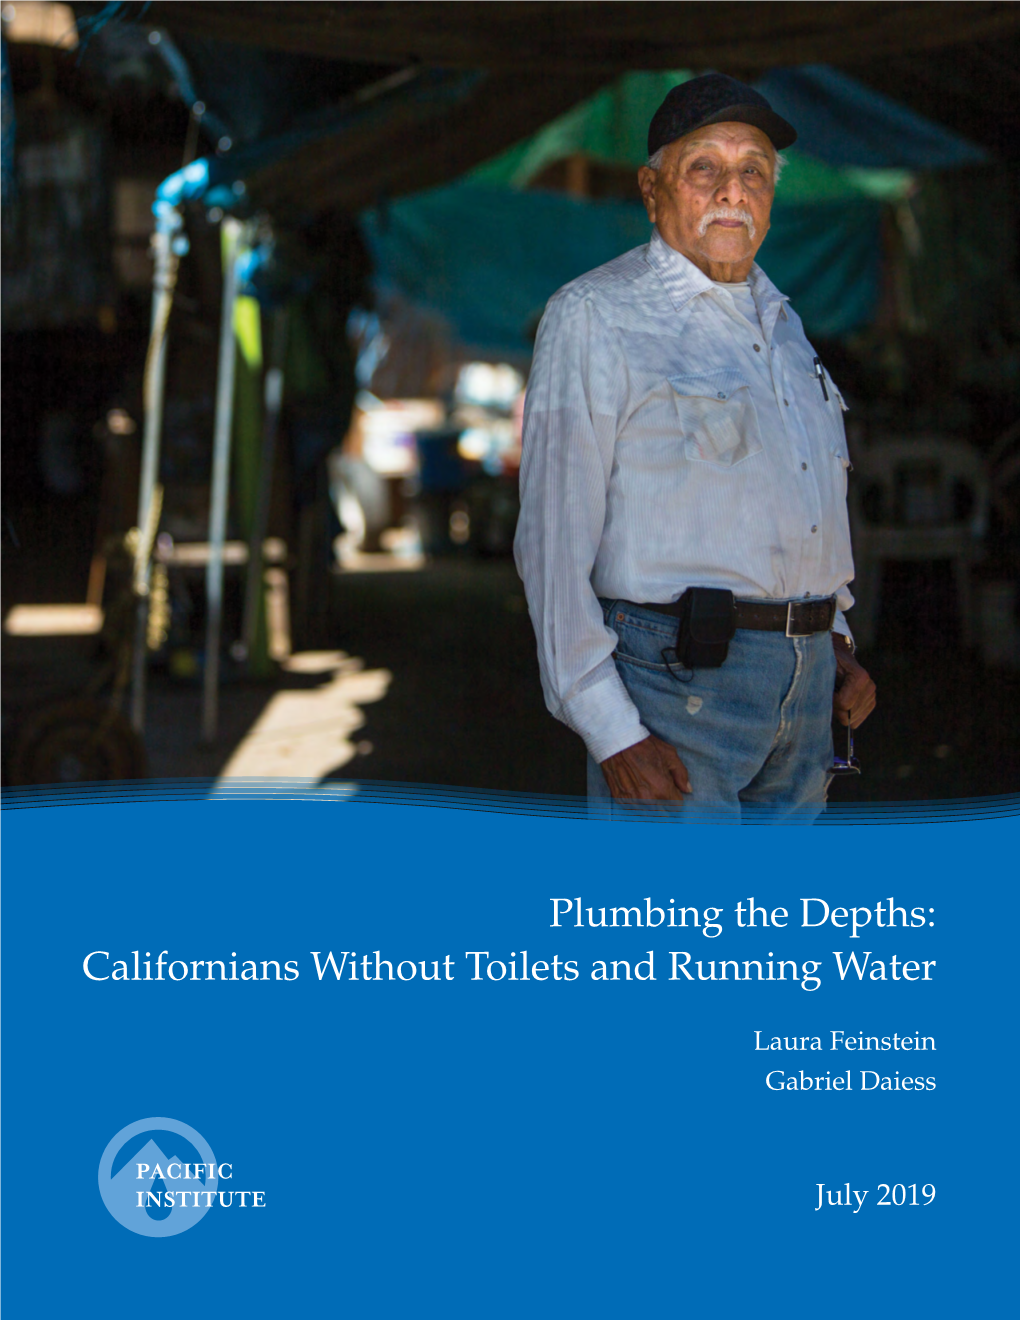 Plumbing the Depths: Californians Without Toilets and Running Water